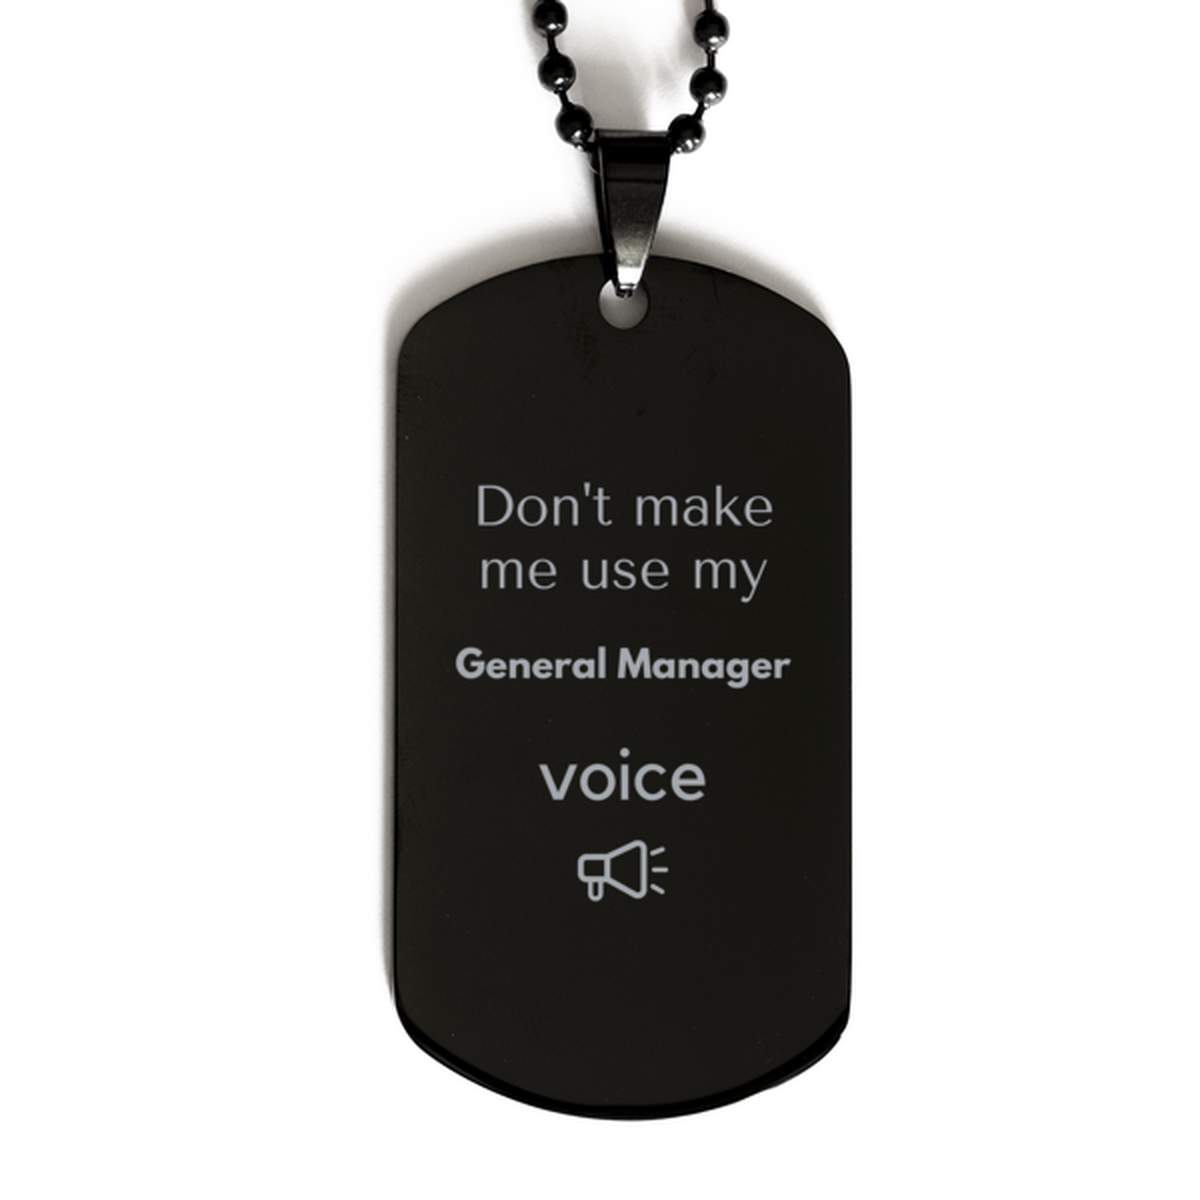 Don't make me use my General Manager voice, Sarcasm General Manager Gifts, Christmas General Manager Black Dog Tag Birthday Unique Gifts For General Manager Coworkers, Men, Women, Colleague, Friends